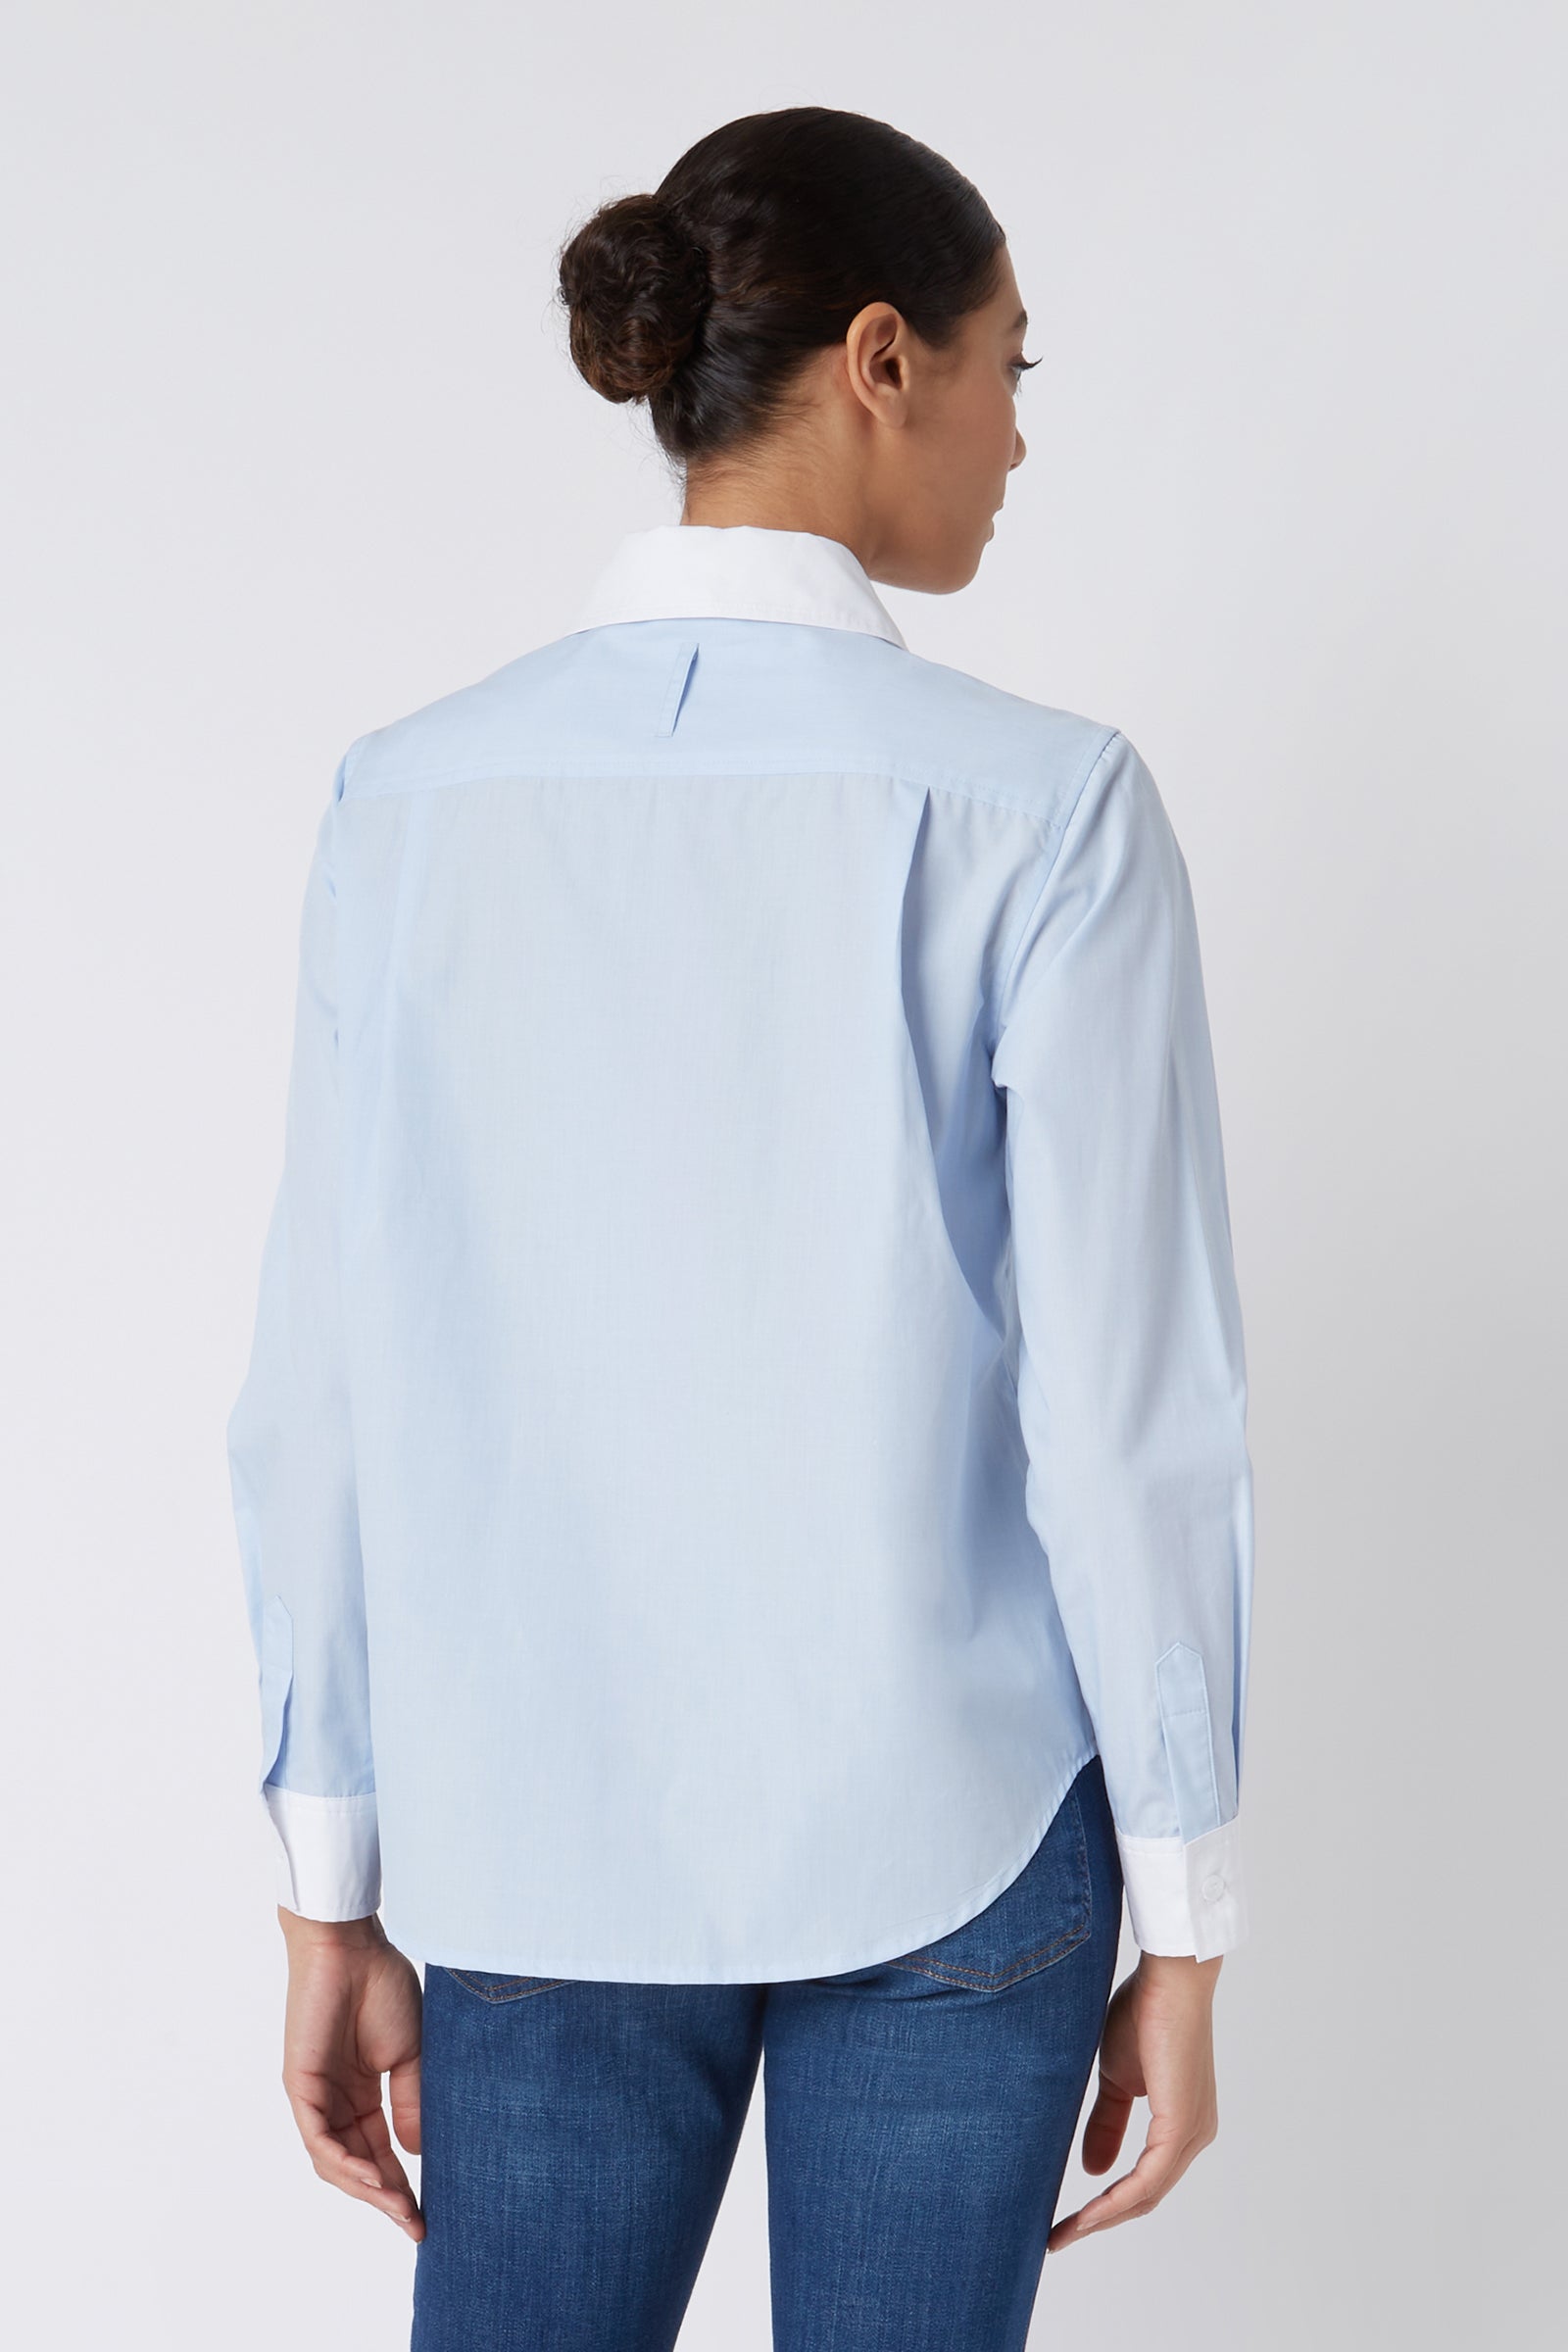 Kal Rieman Classic Tailored Shirt in Oxford Blue on Model Looking Left Cropped Front View